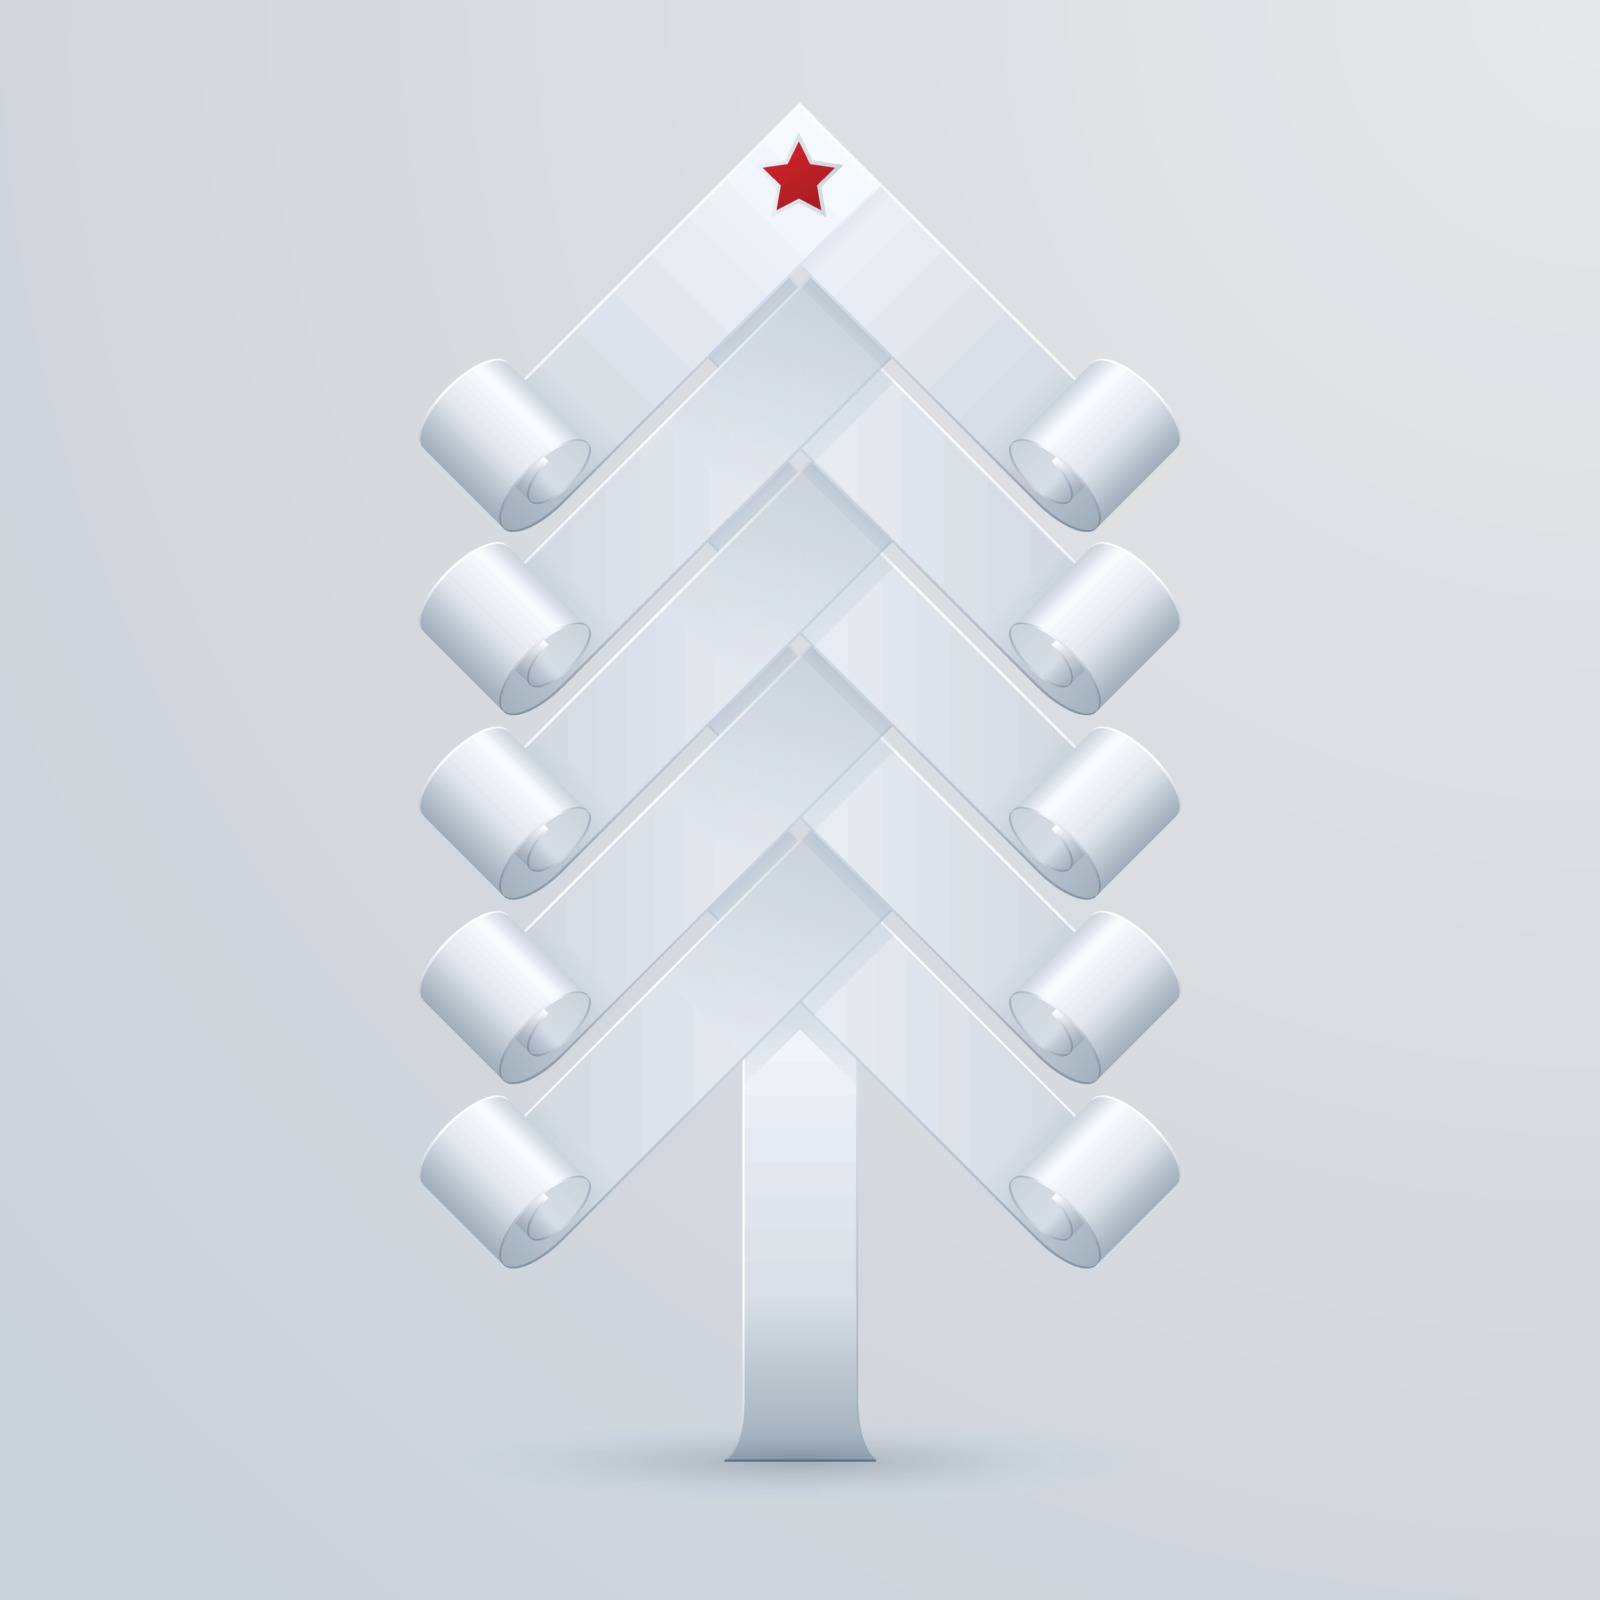 Christmas tree made ������of paper with curled edges and a red star on top